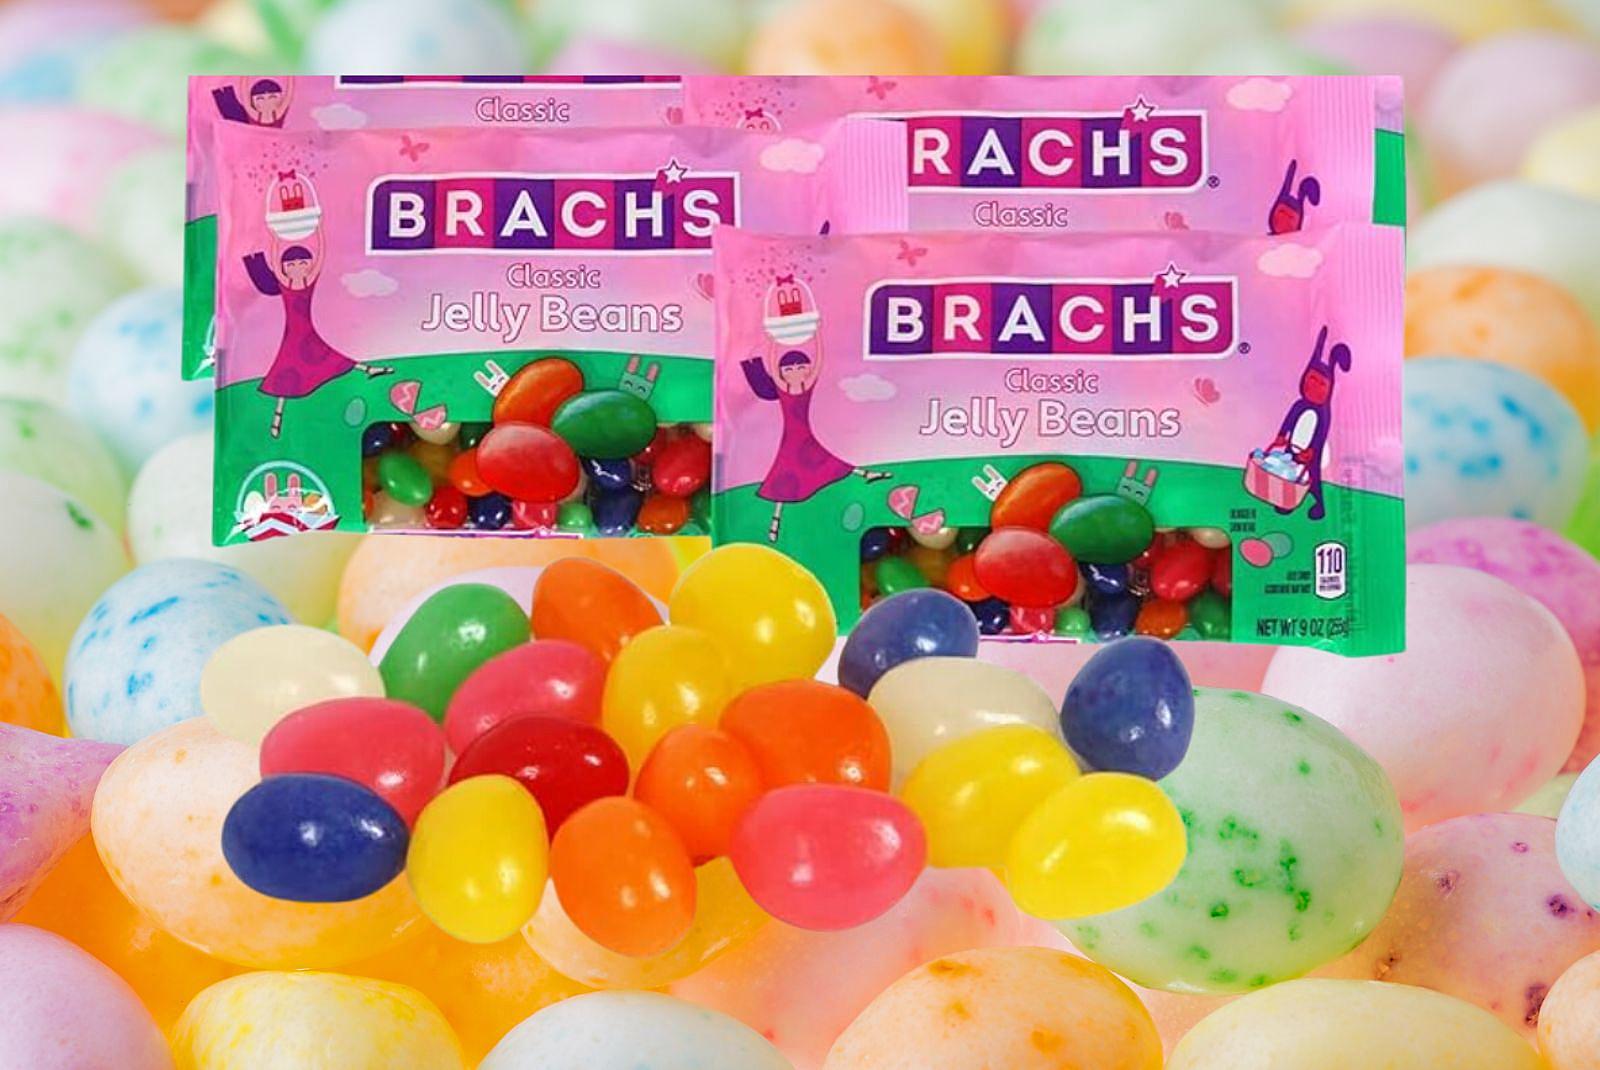 Most Hated Easter Candy In Minnesota, Iowa, and South Dakota